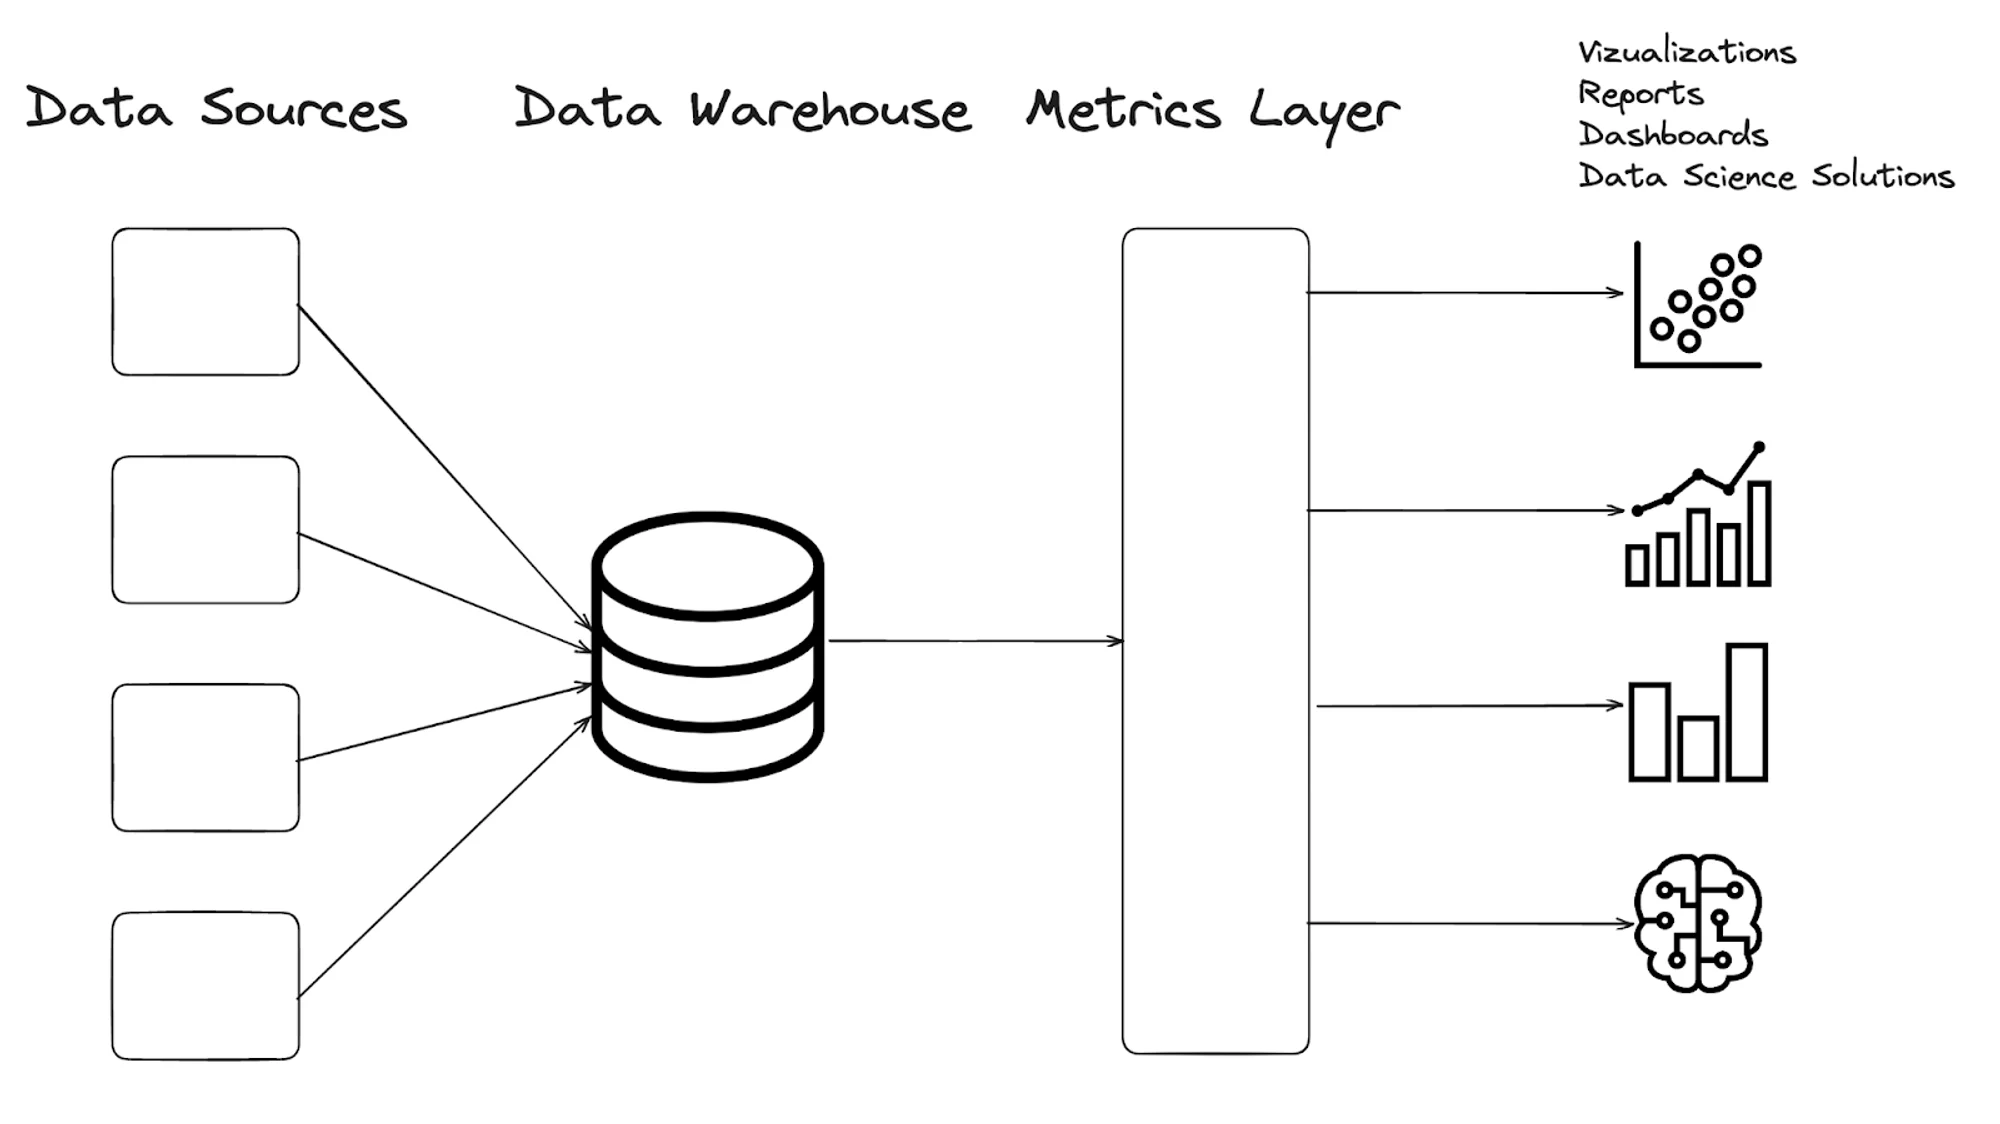 The concept of a metrics layer